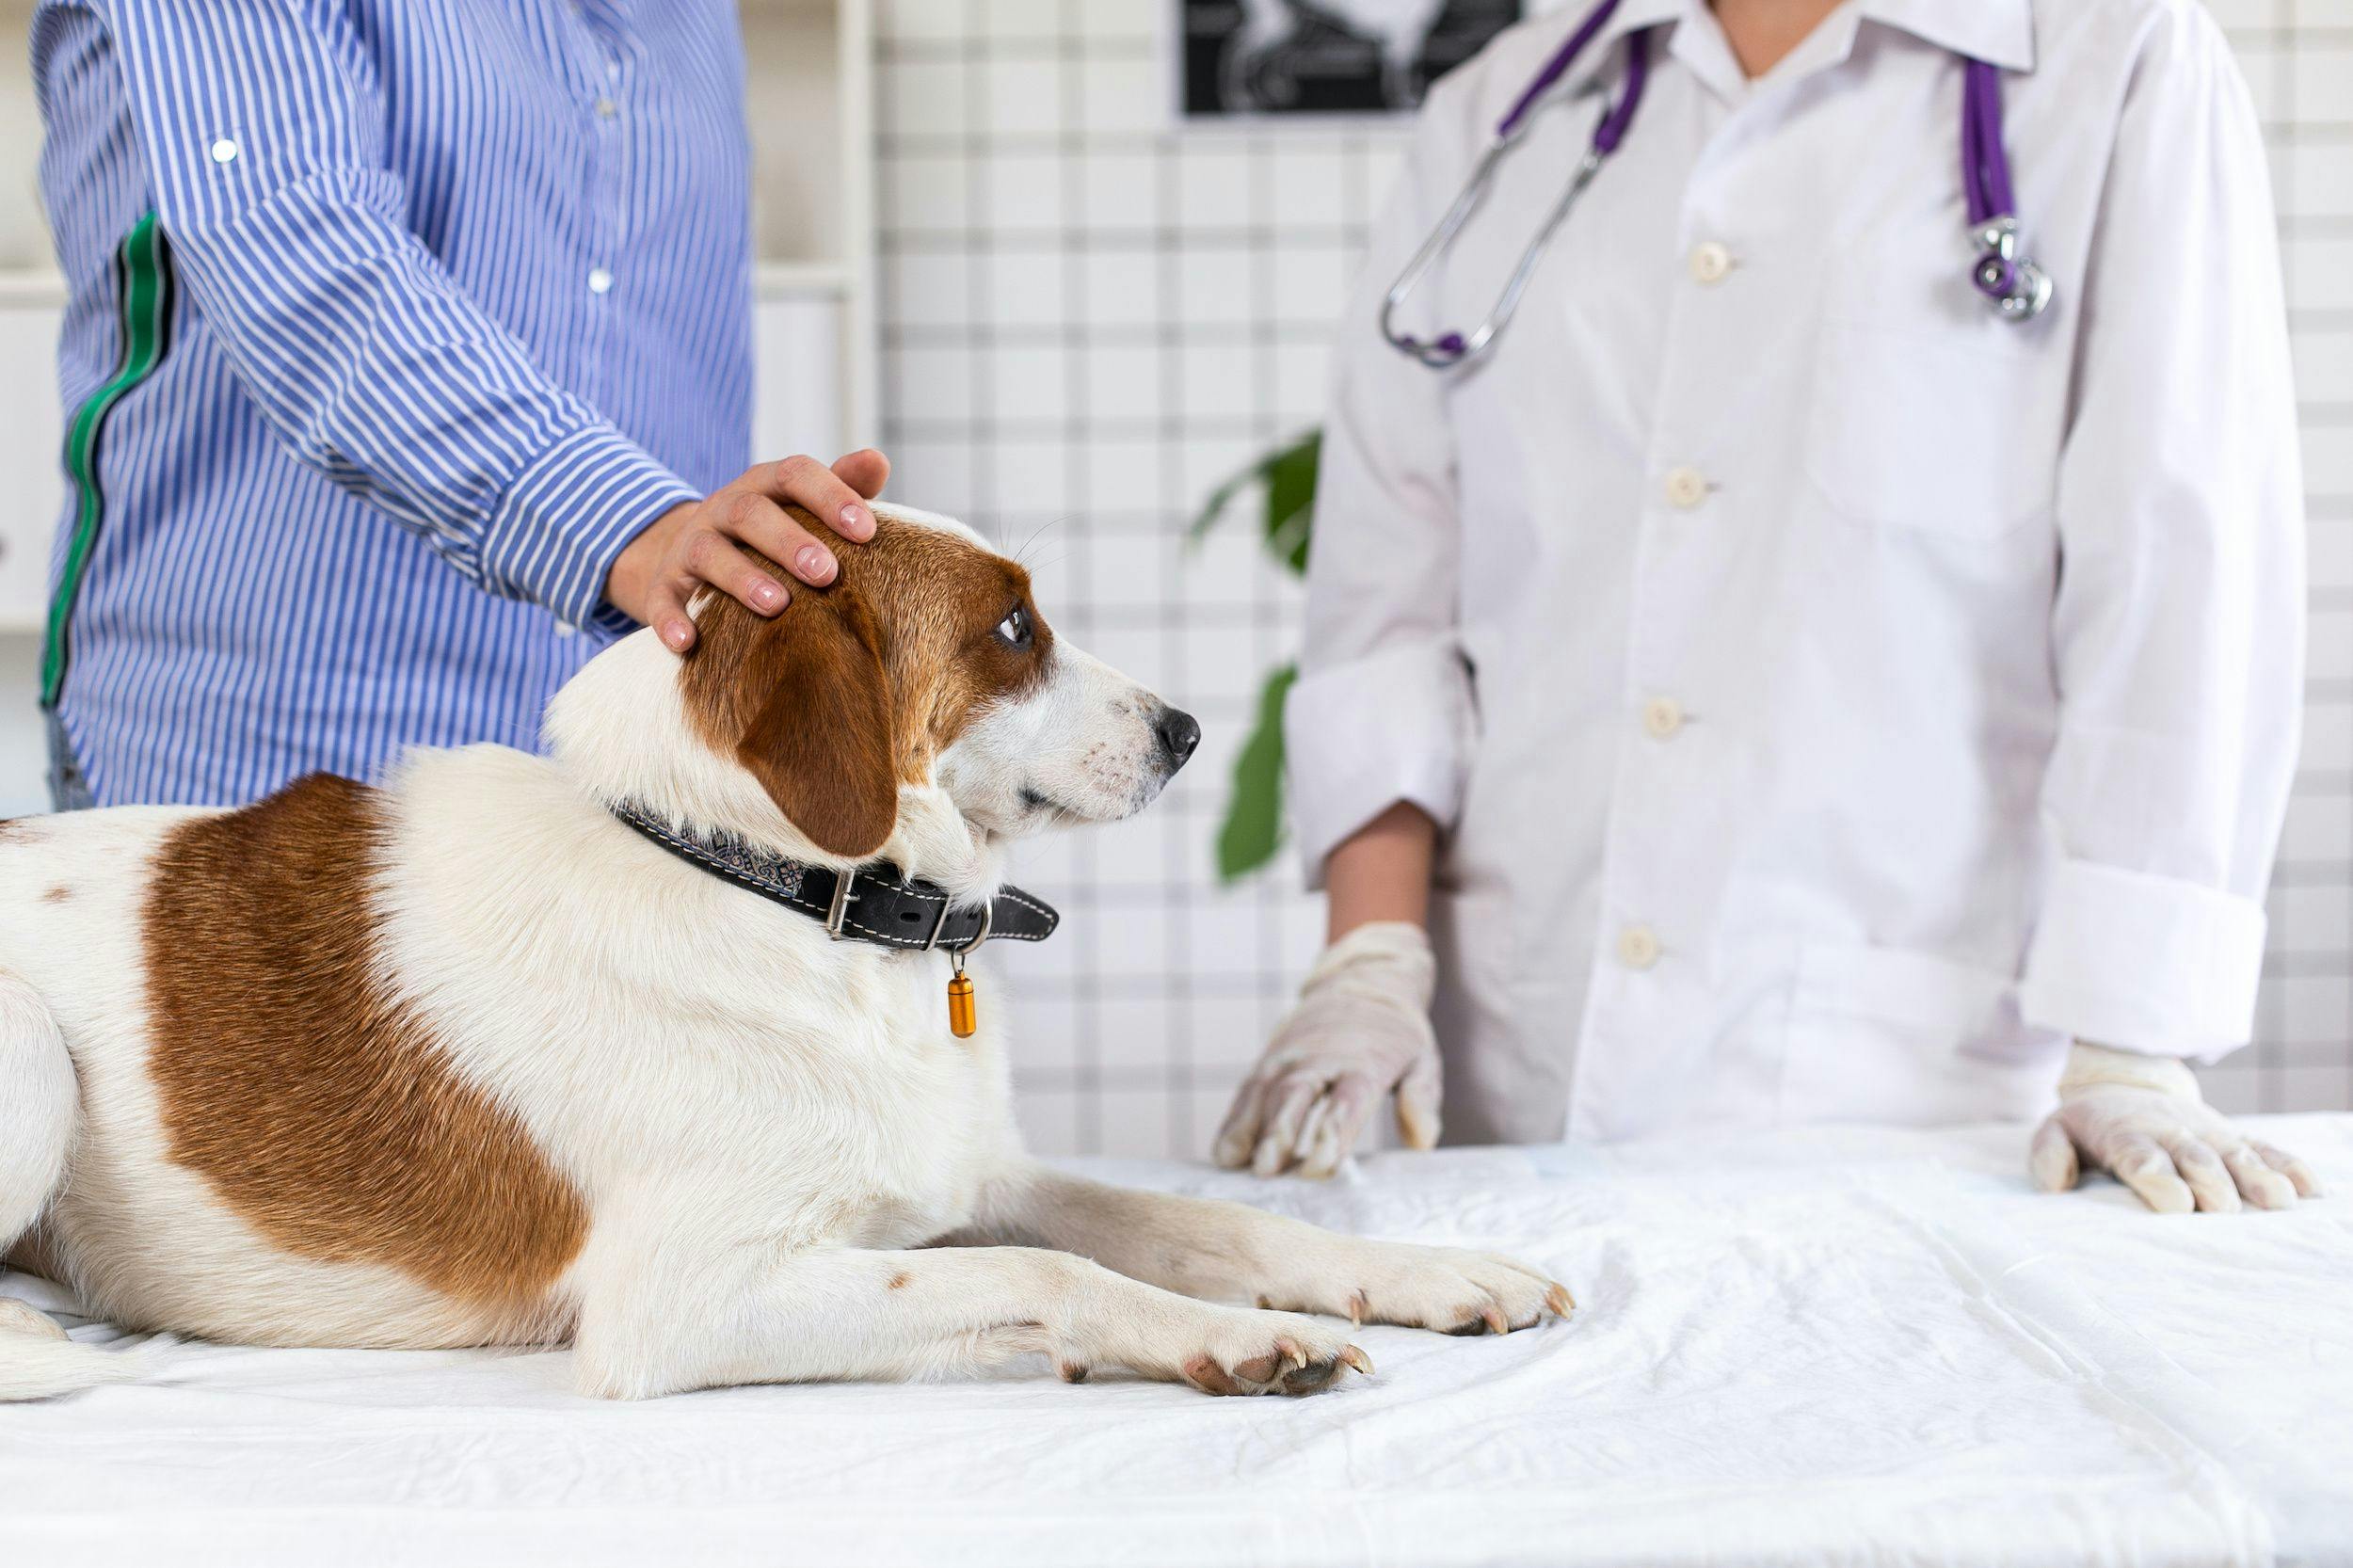 Canine cancer testing advancements